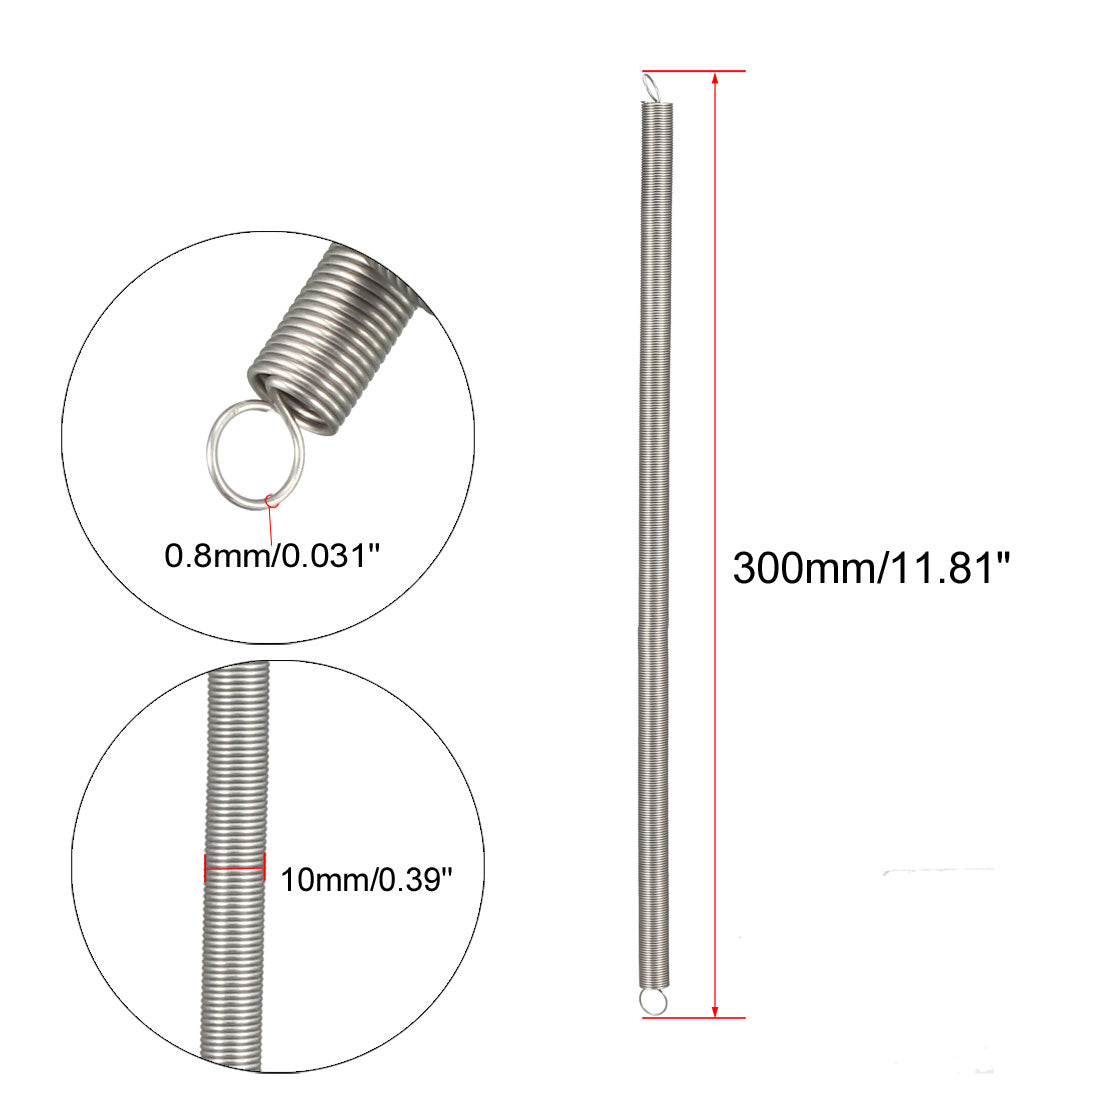 uxcell Uxcell Extended Tension Spring Wire Diameter 0.031", OD 0.39", Free Length 11.81"